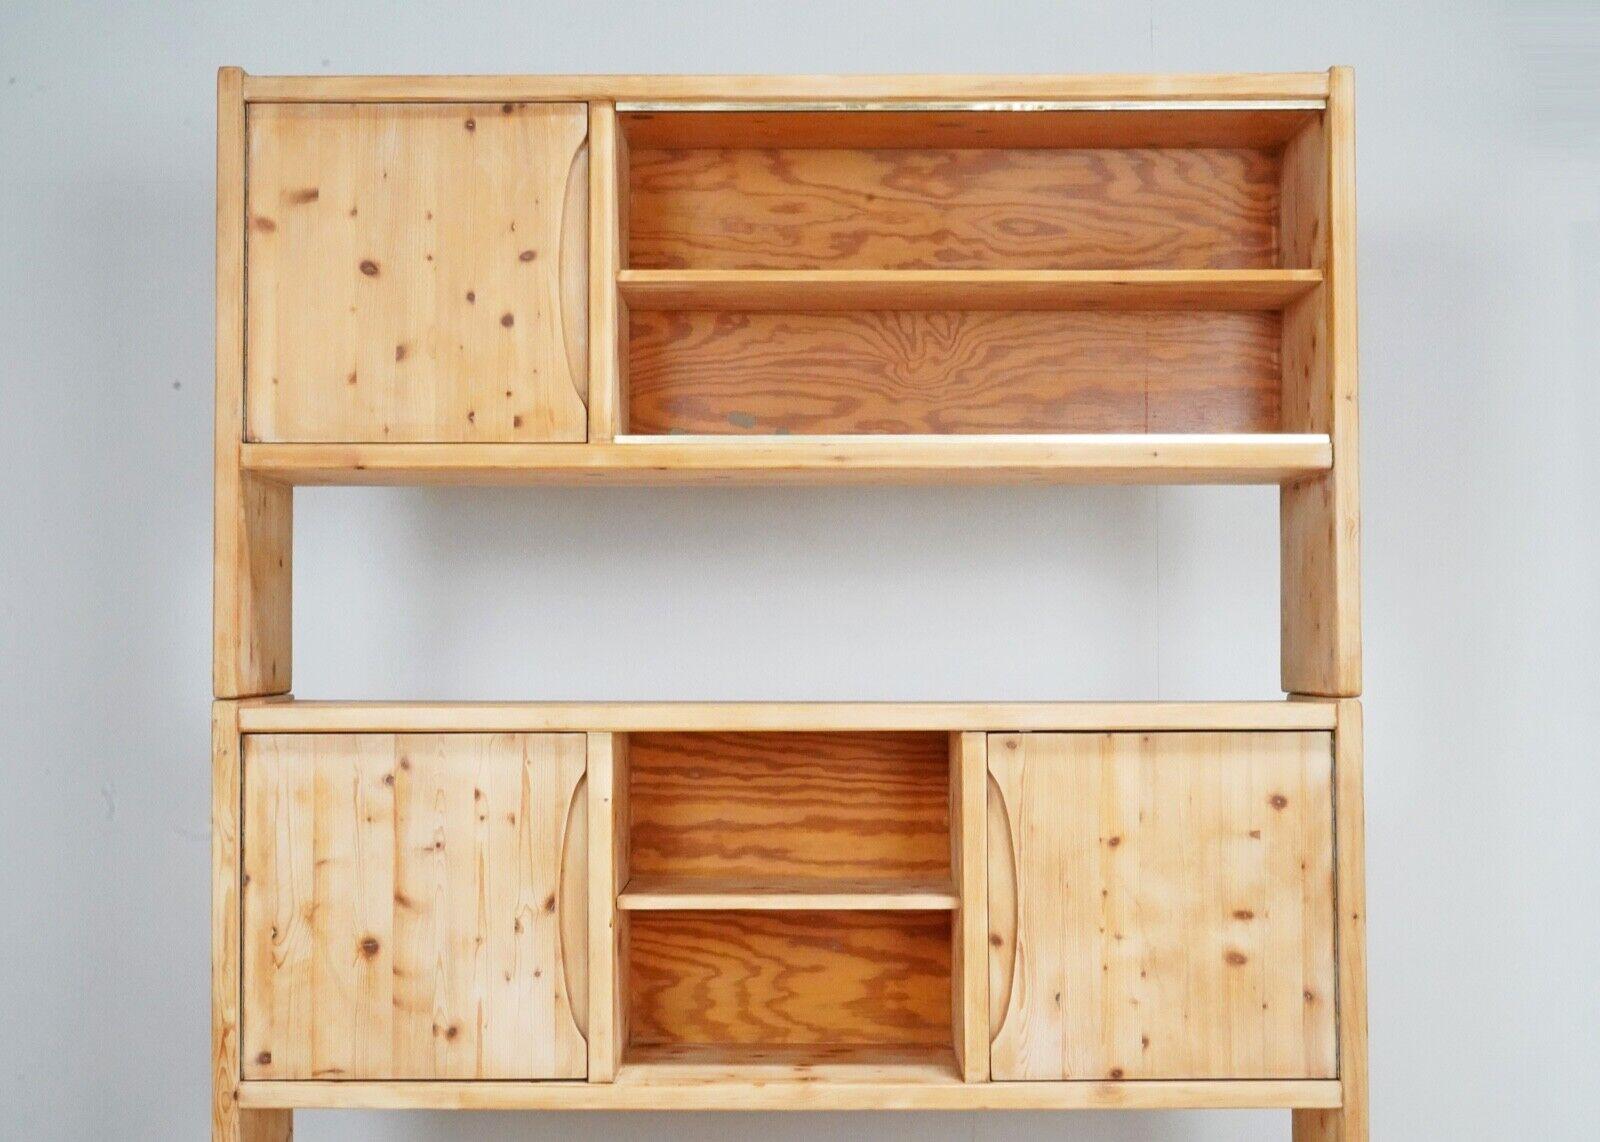  French pine shelving unit made from solid pine. 
Dating from around the 1980s.
It has been stripped in the past taking it back to bare wood.
The three tiers of the unit can be lifted off as they locate on wooded dowels. 
The doors close and are